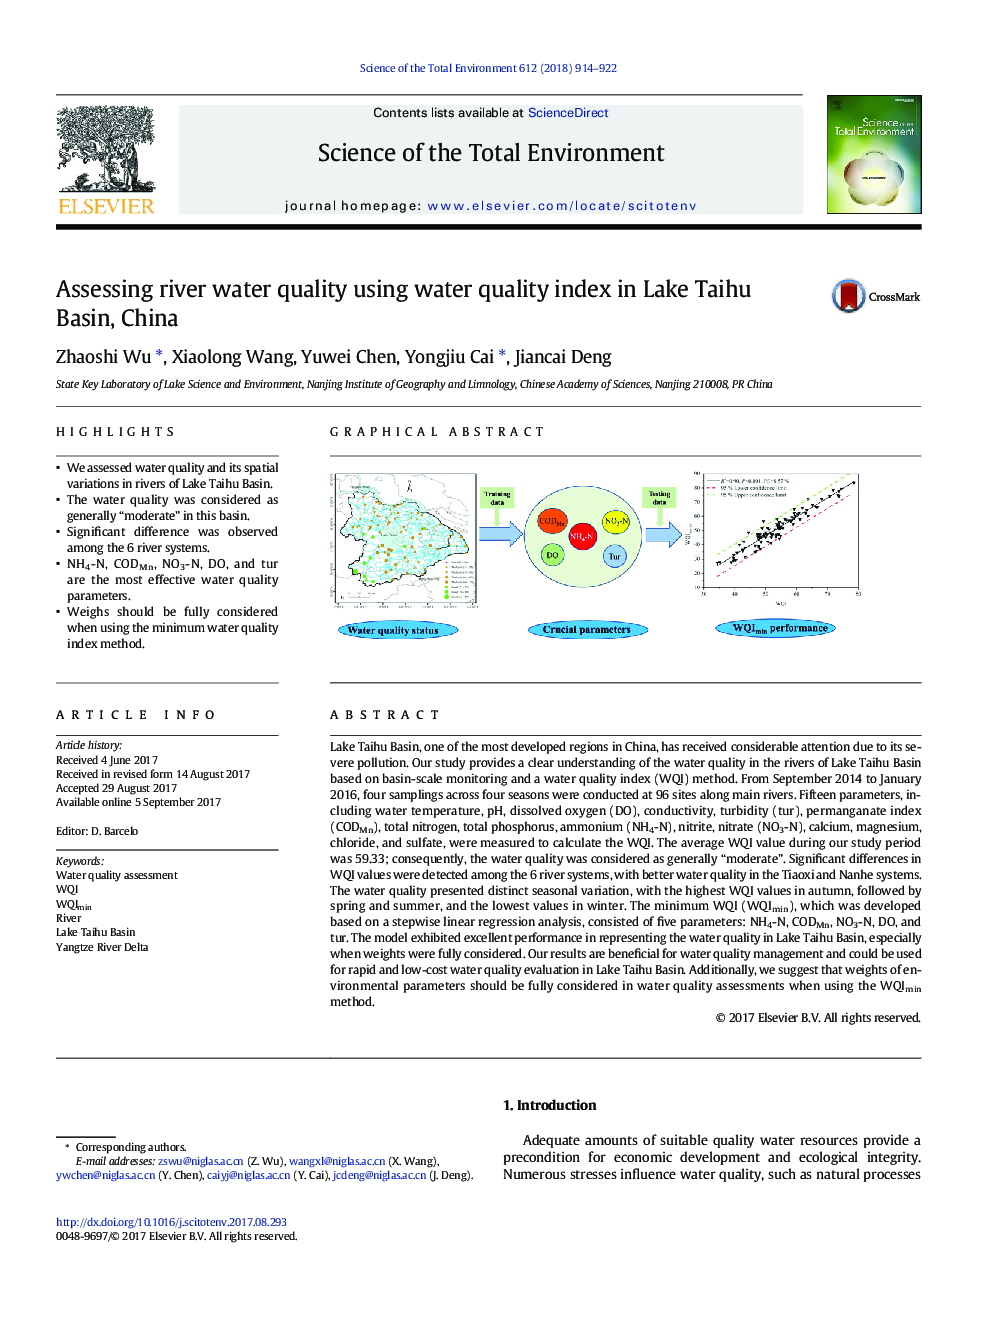 Assessing river water quality using water quality index in Lake Taihu Basin, China